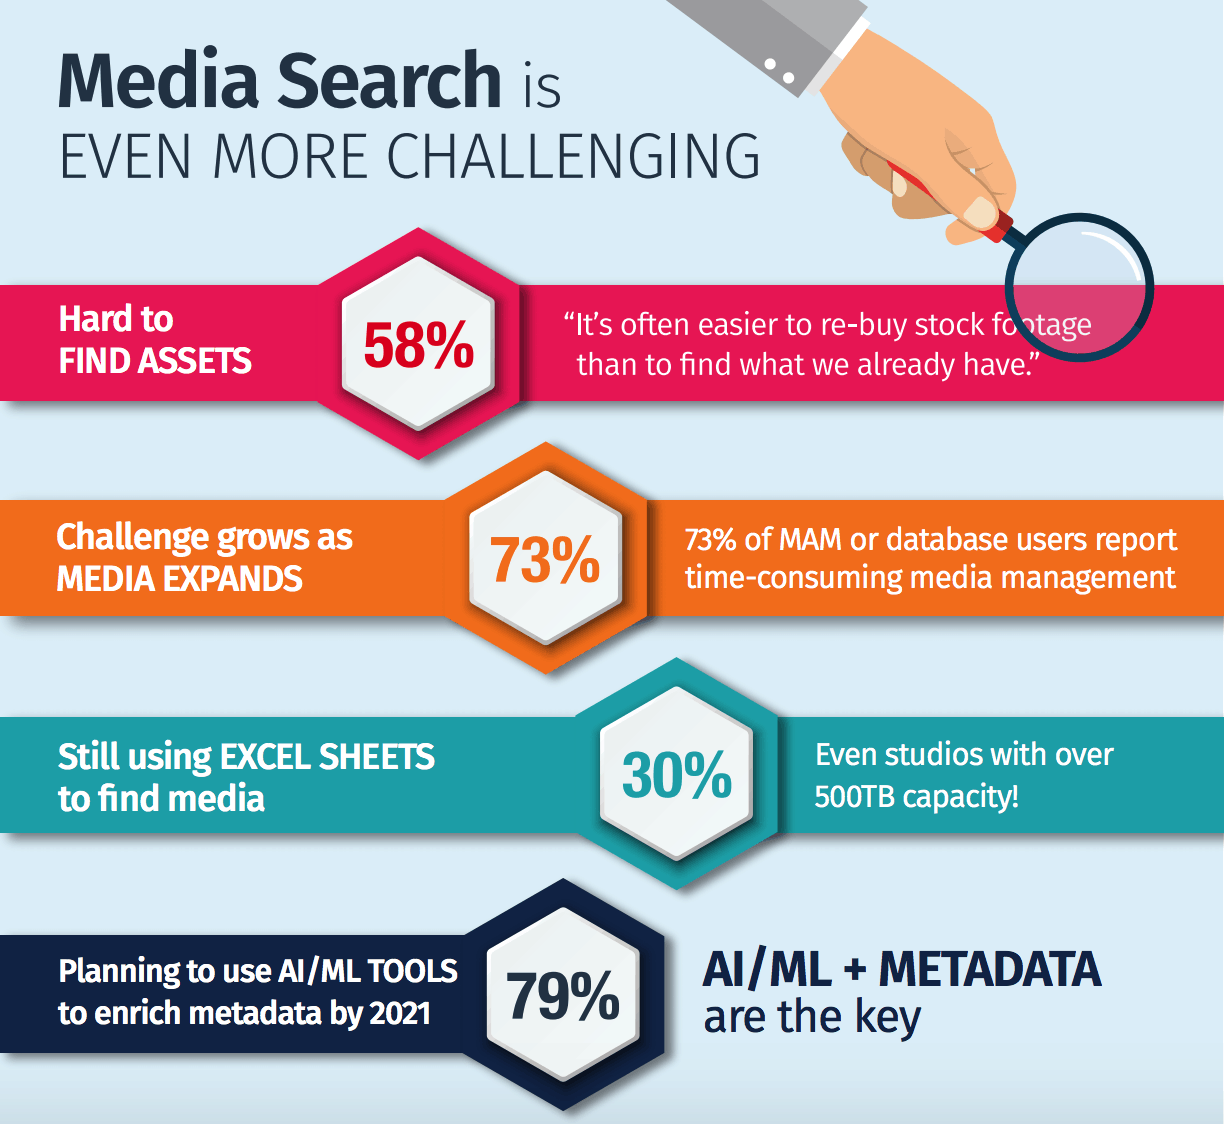 Cloudian survey shows media archive storage search challenges, with AI and machine learning emerging as a solution